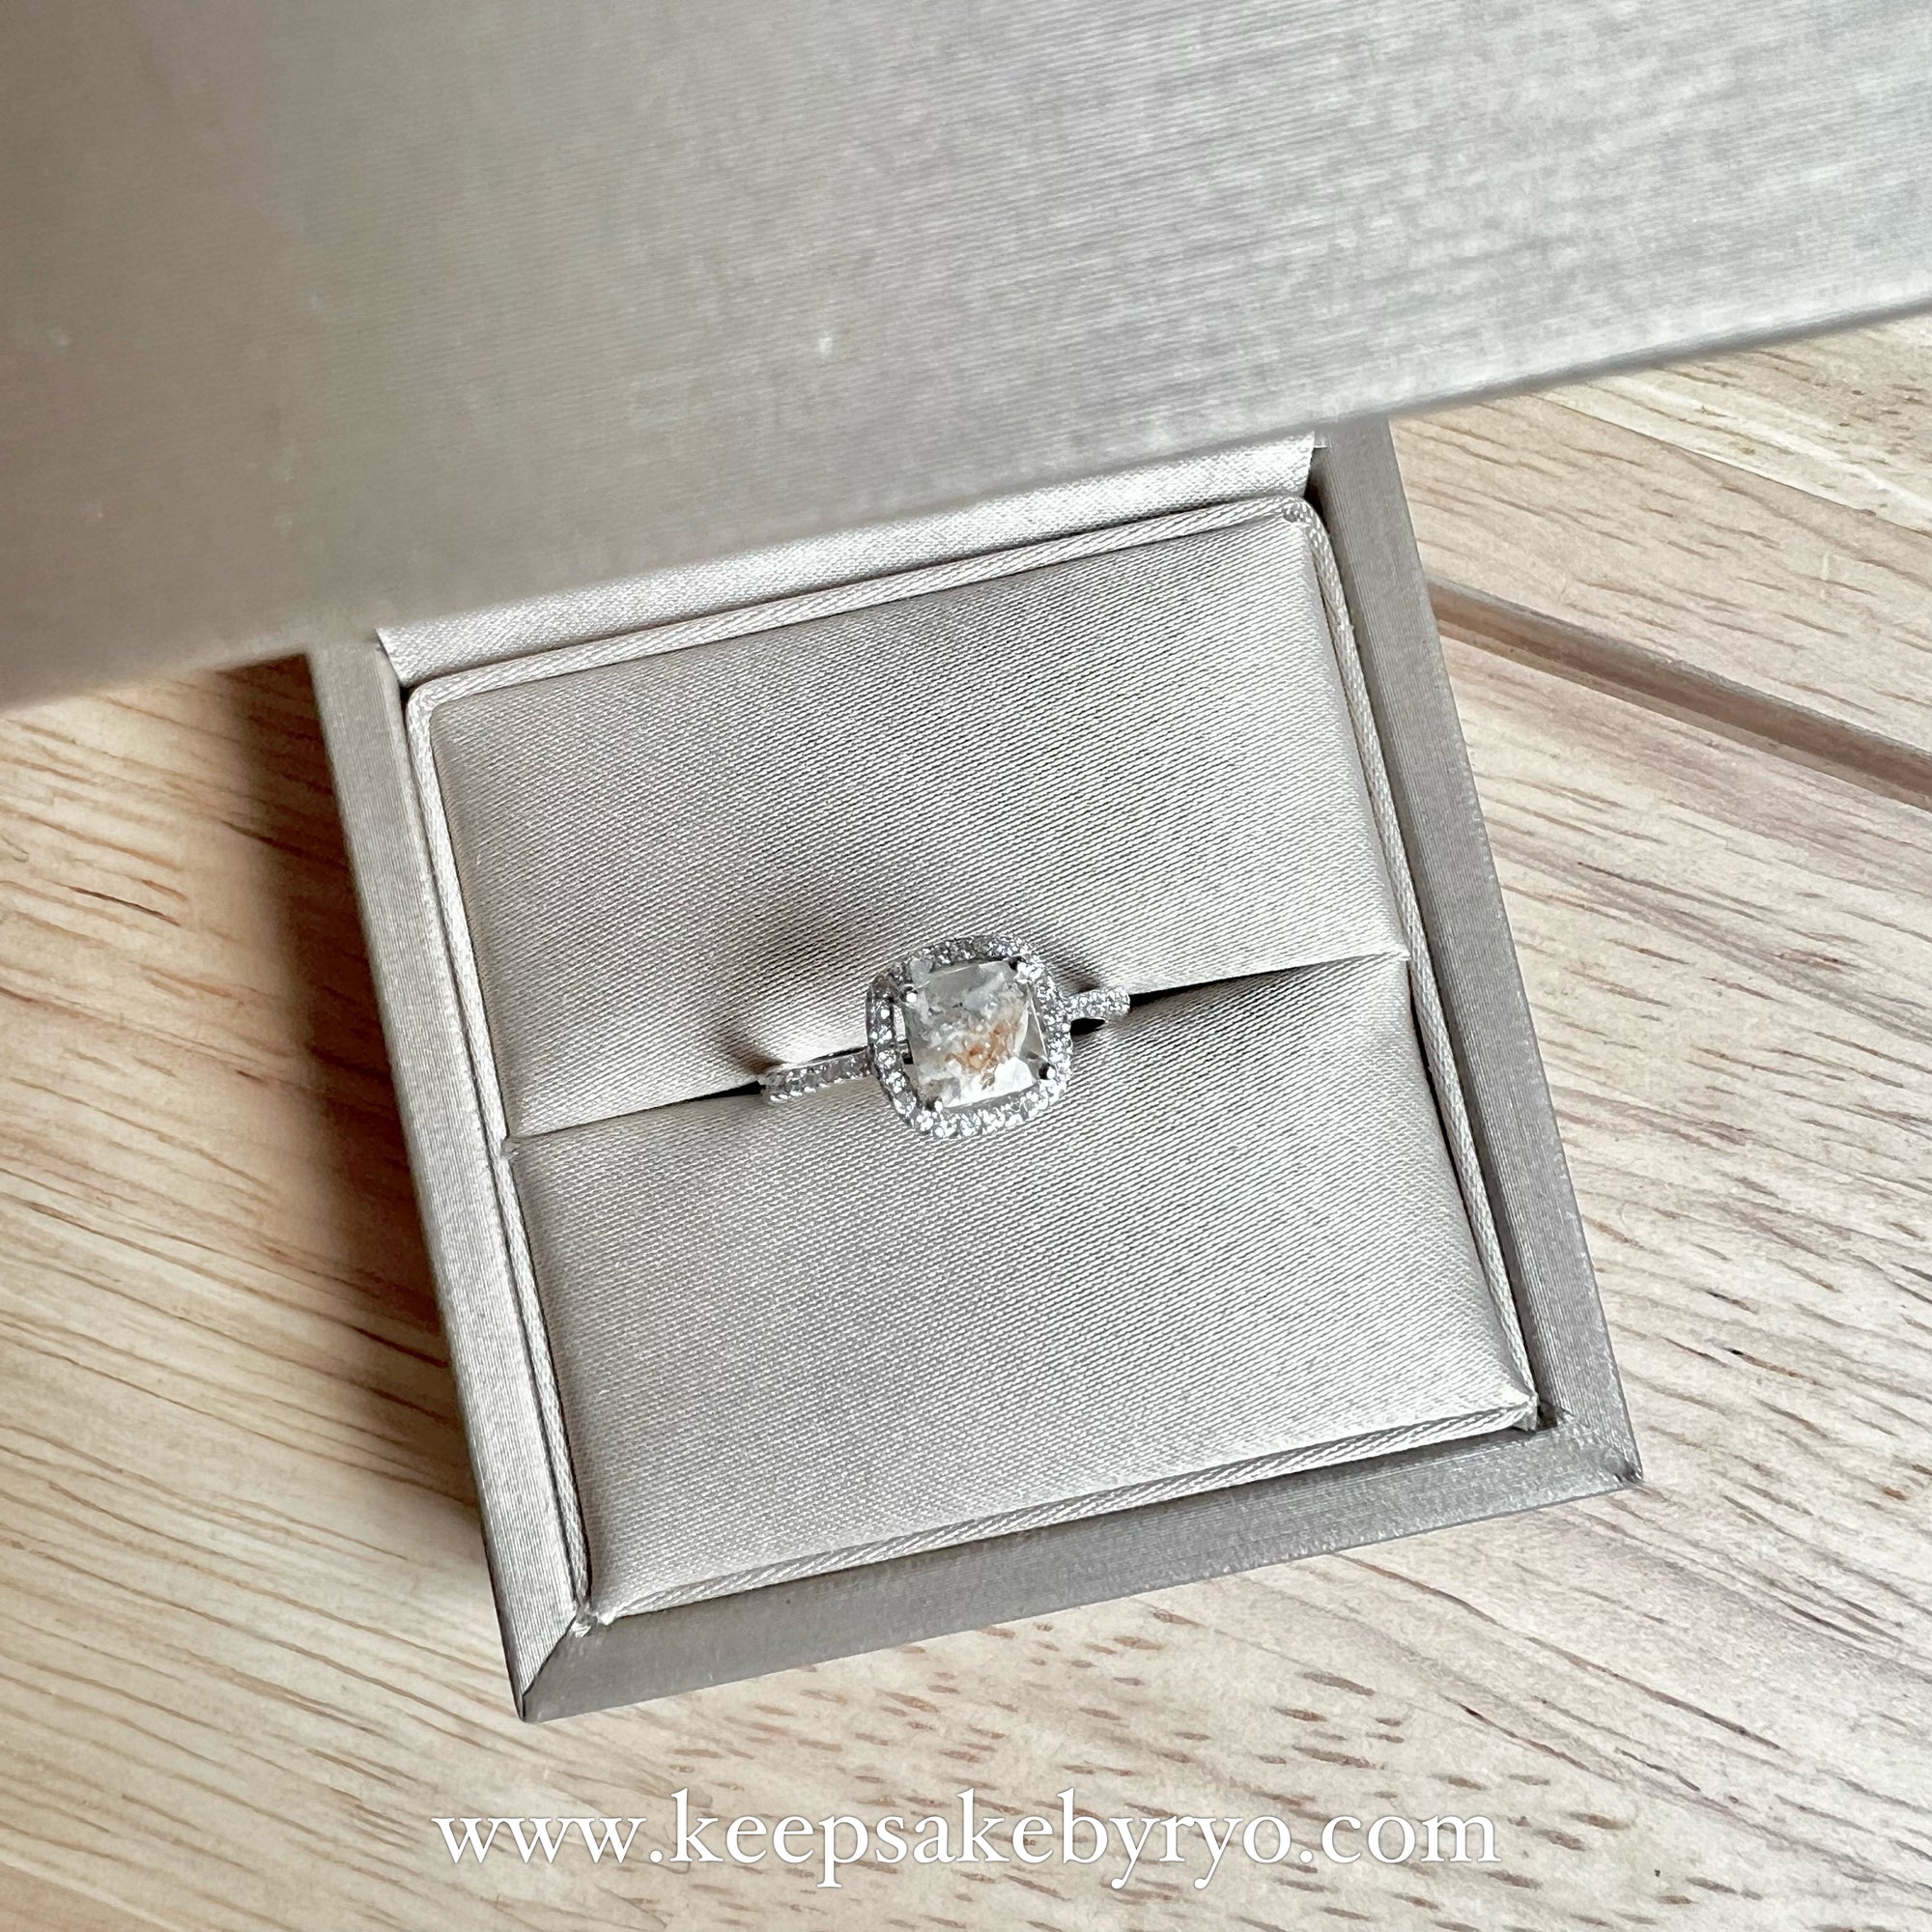 ASHES 925 SOLITAIRE: YARA RING WITH CUSHION INCLUSION STONE